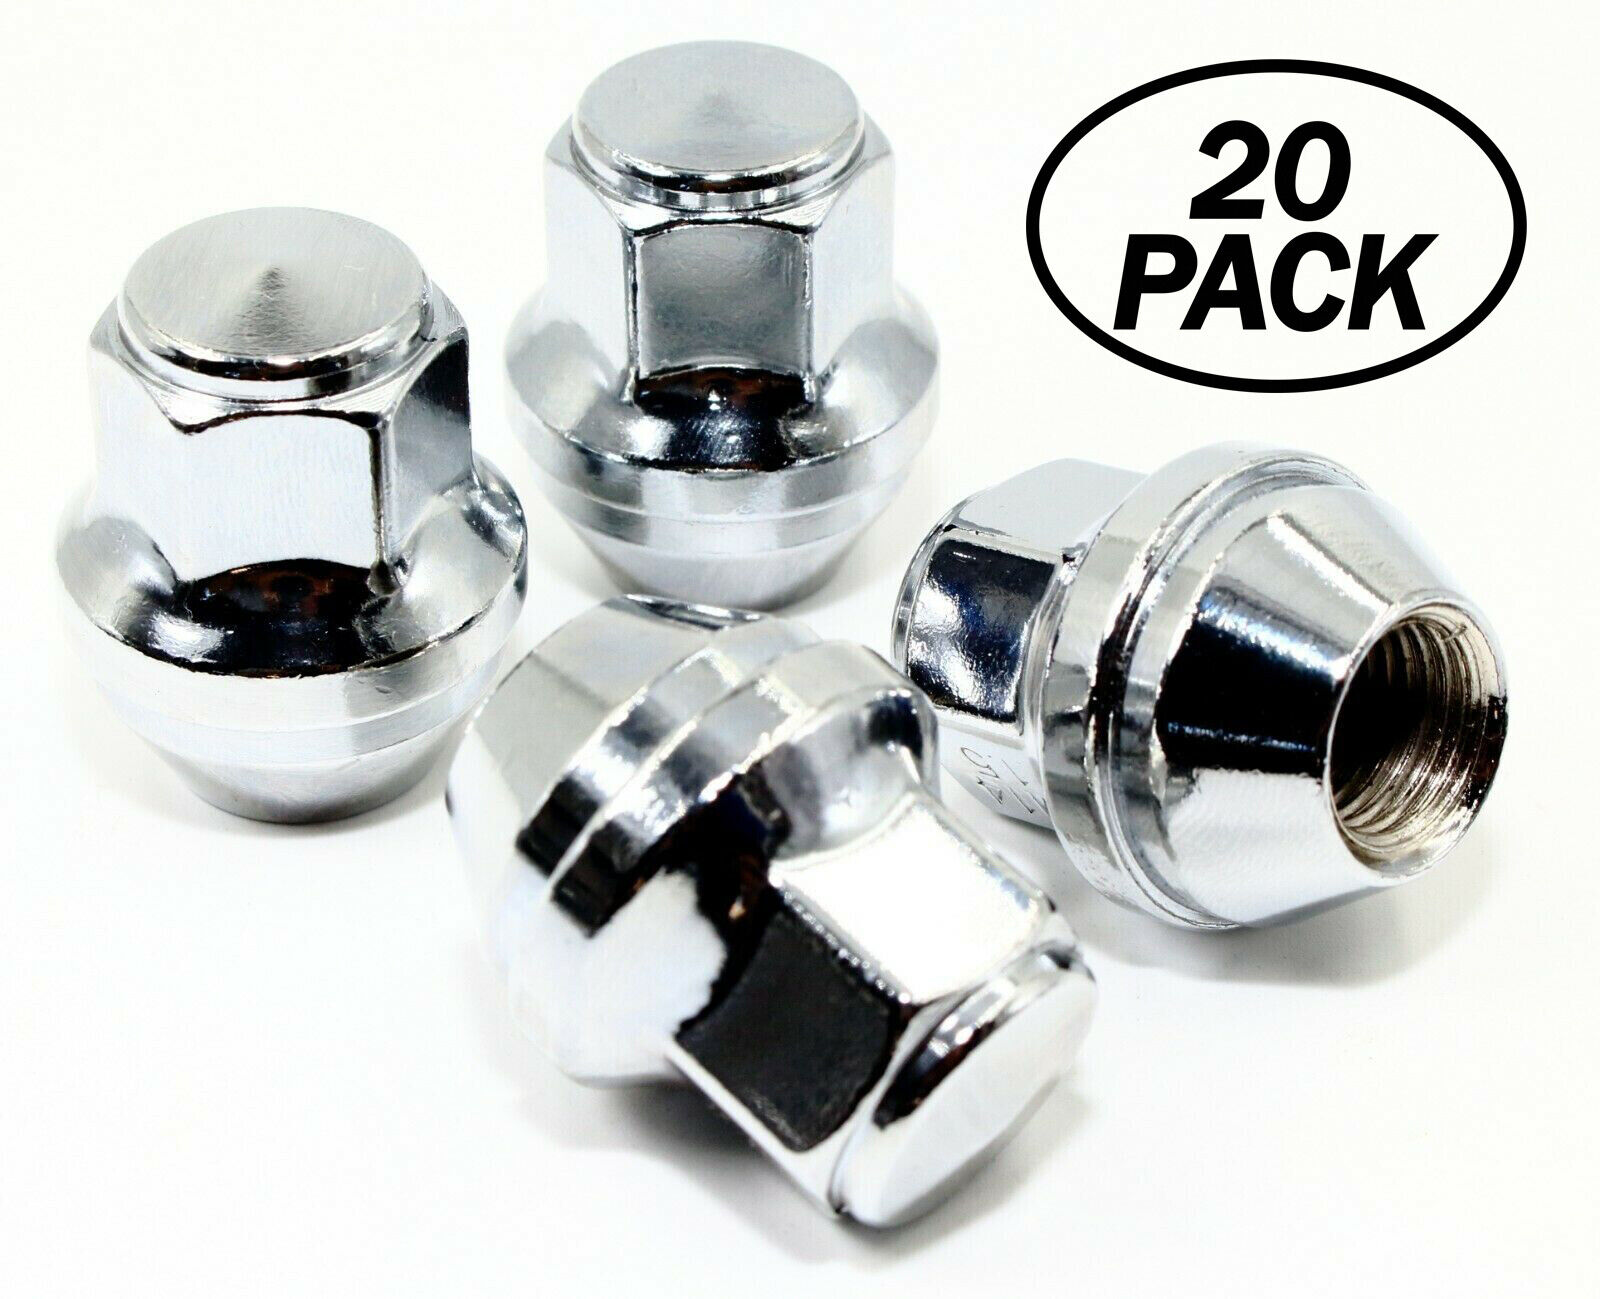 20 14x1.5 21mm Hex Chrome OEM Factory Style Acorn Ford Mustang Lincoln Lug Nuts 